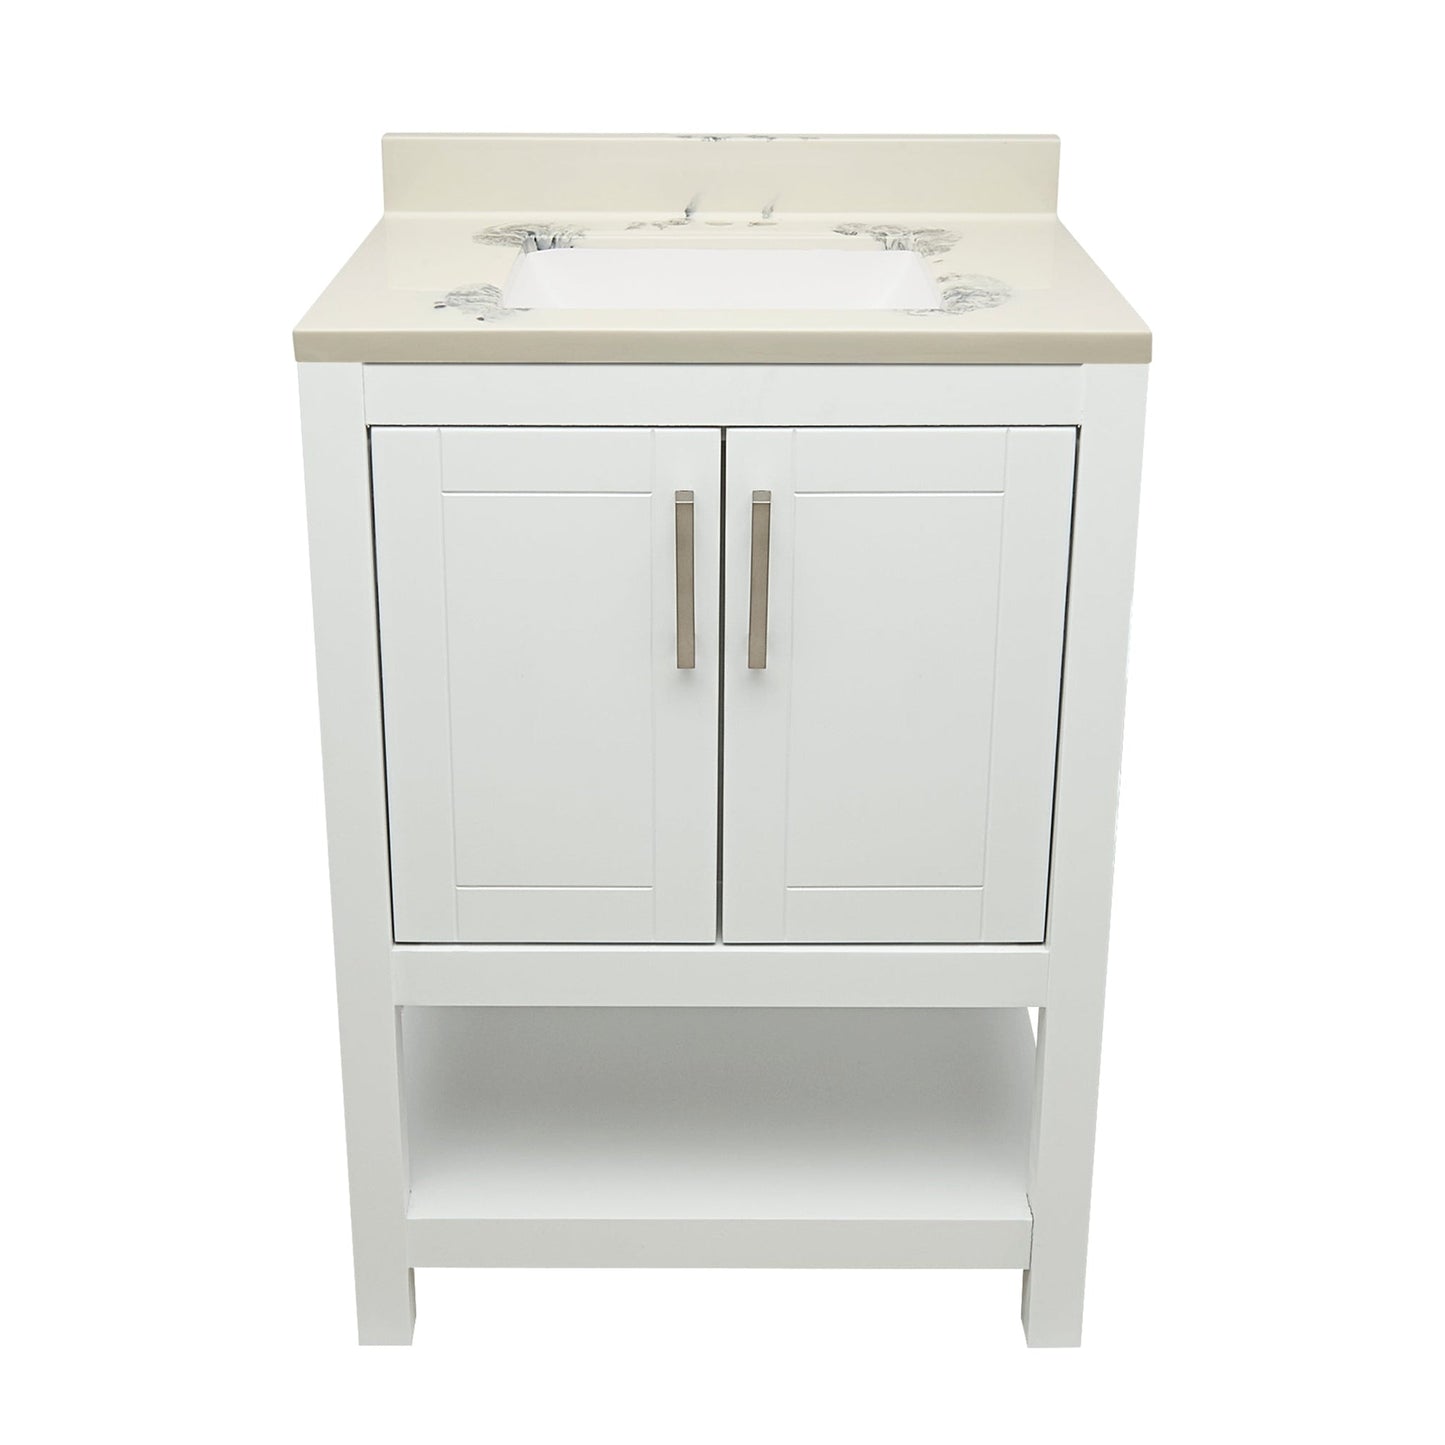 Ella's Bubbles Taos 25" White Bathroom Vanity With Carrara White Cultured Marble Top With Backsplash and Sink